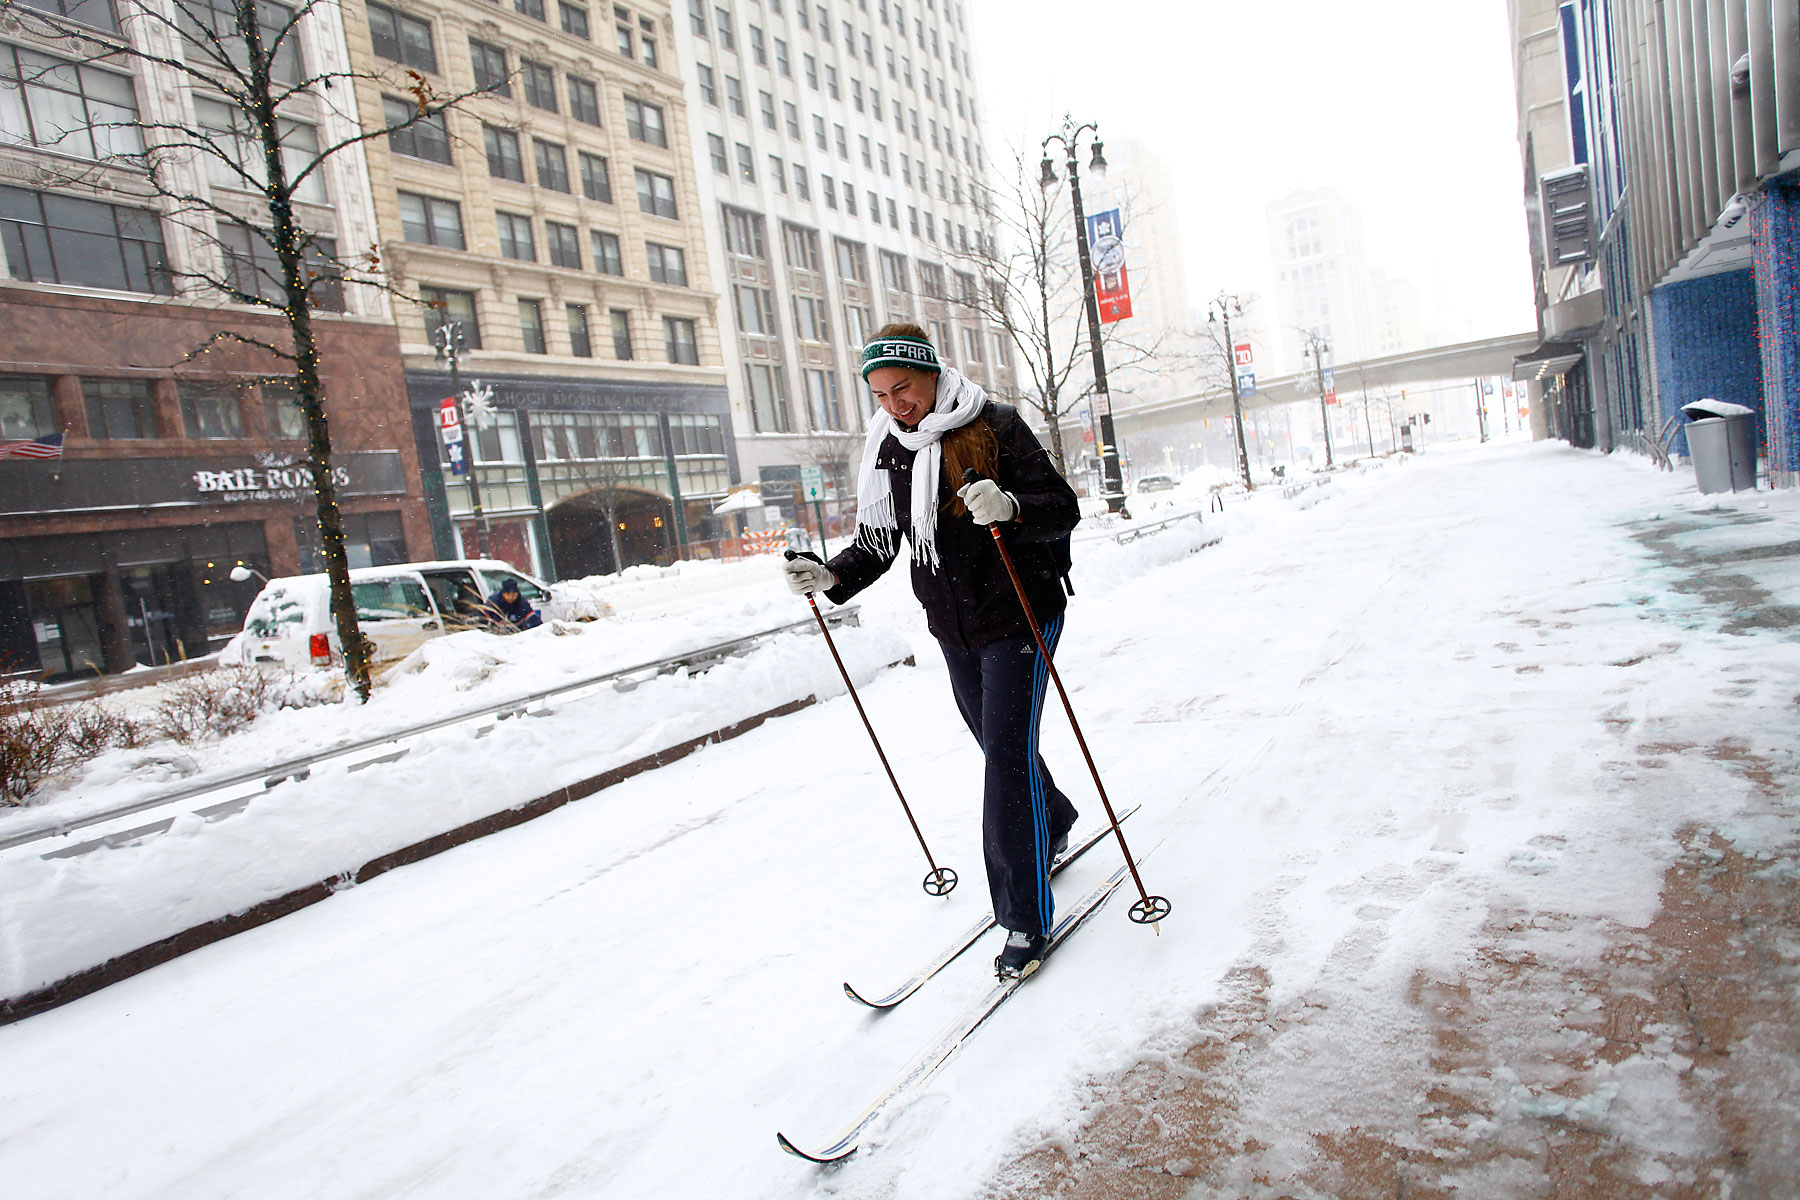 Alison Mueller skies to work through several inches of snow along Woodward Avenue as the area deals with record breaking freezing weather January 6, 2014 in Detroit, Michigan. (Joshua Lott&mdash;Getty Images)